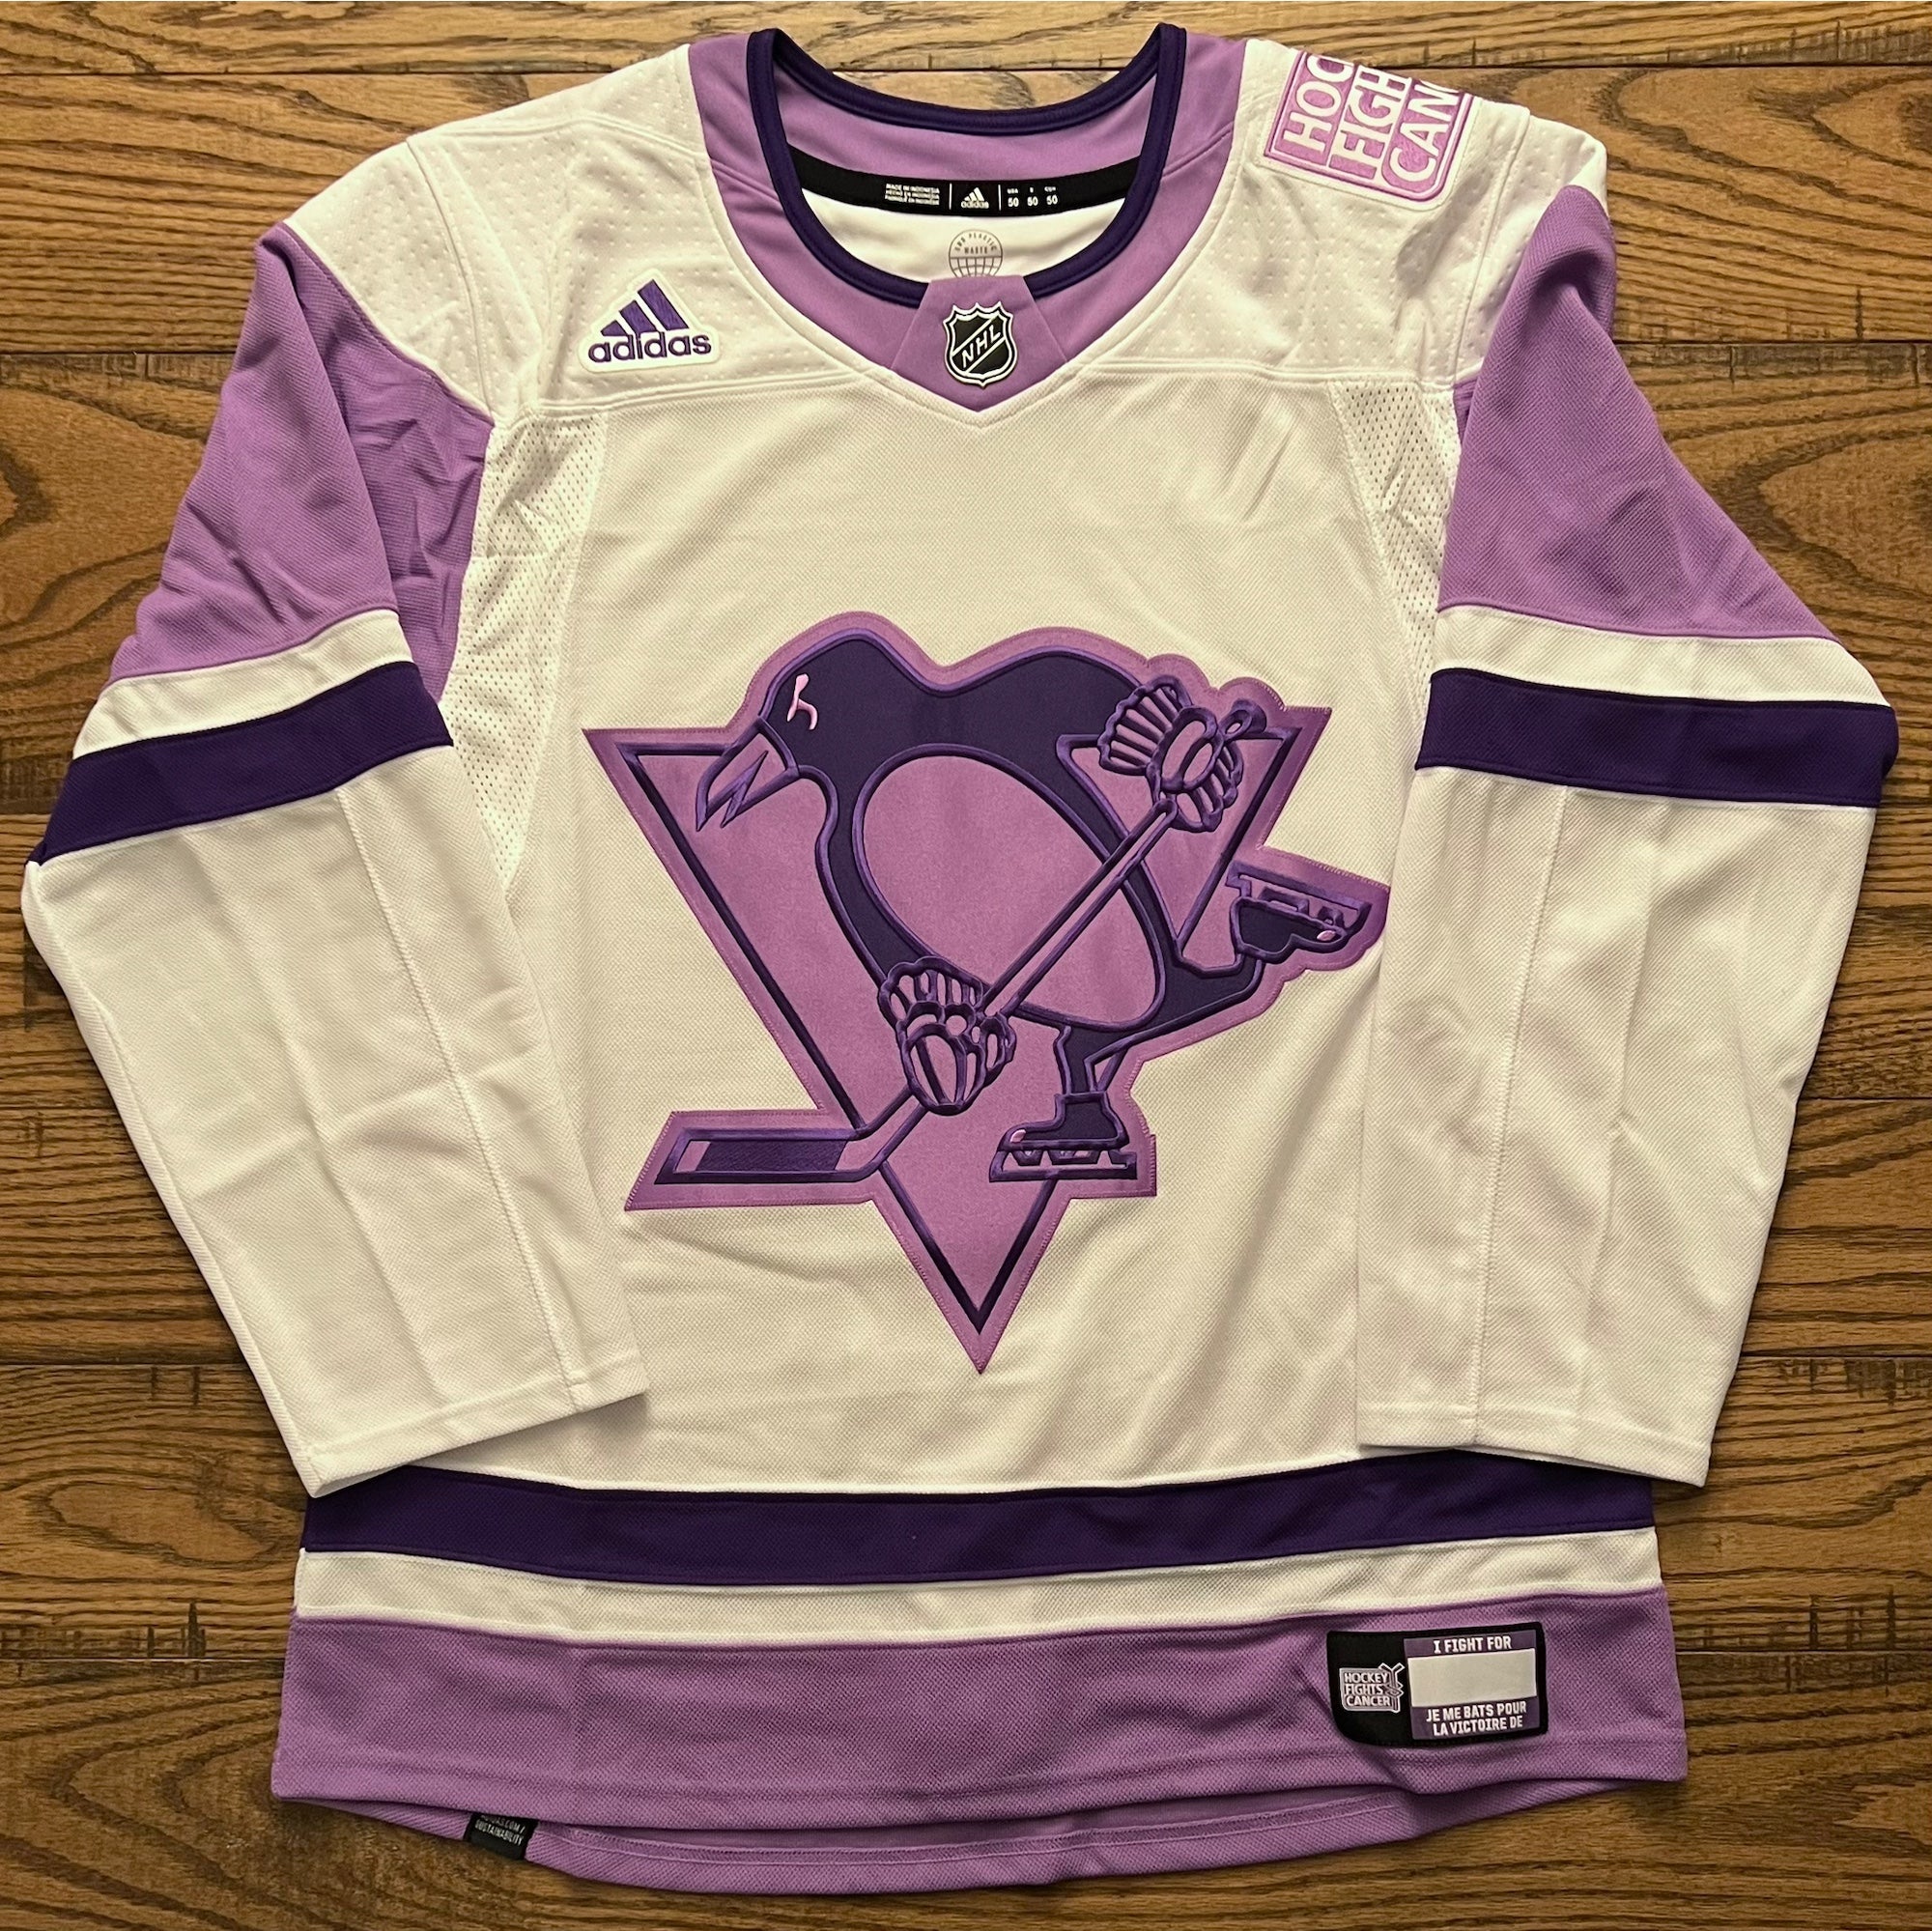 Check out the Penguins' 'Hockey Fights Cancer' warm-up jerseys